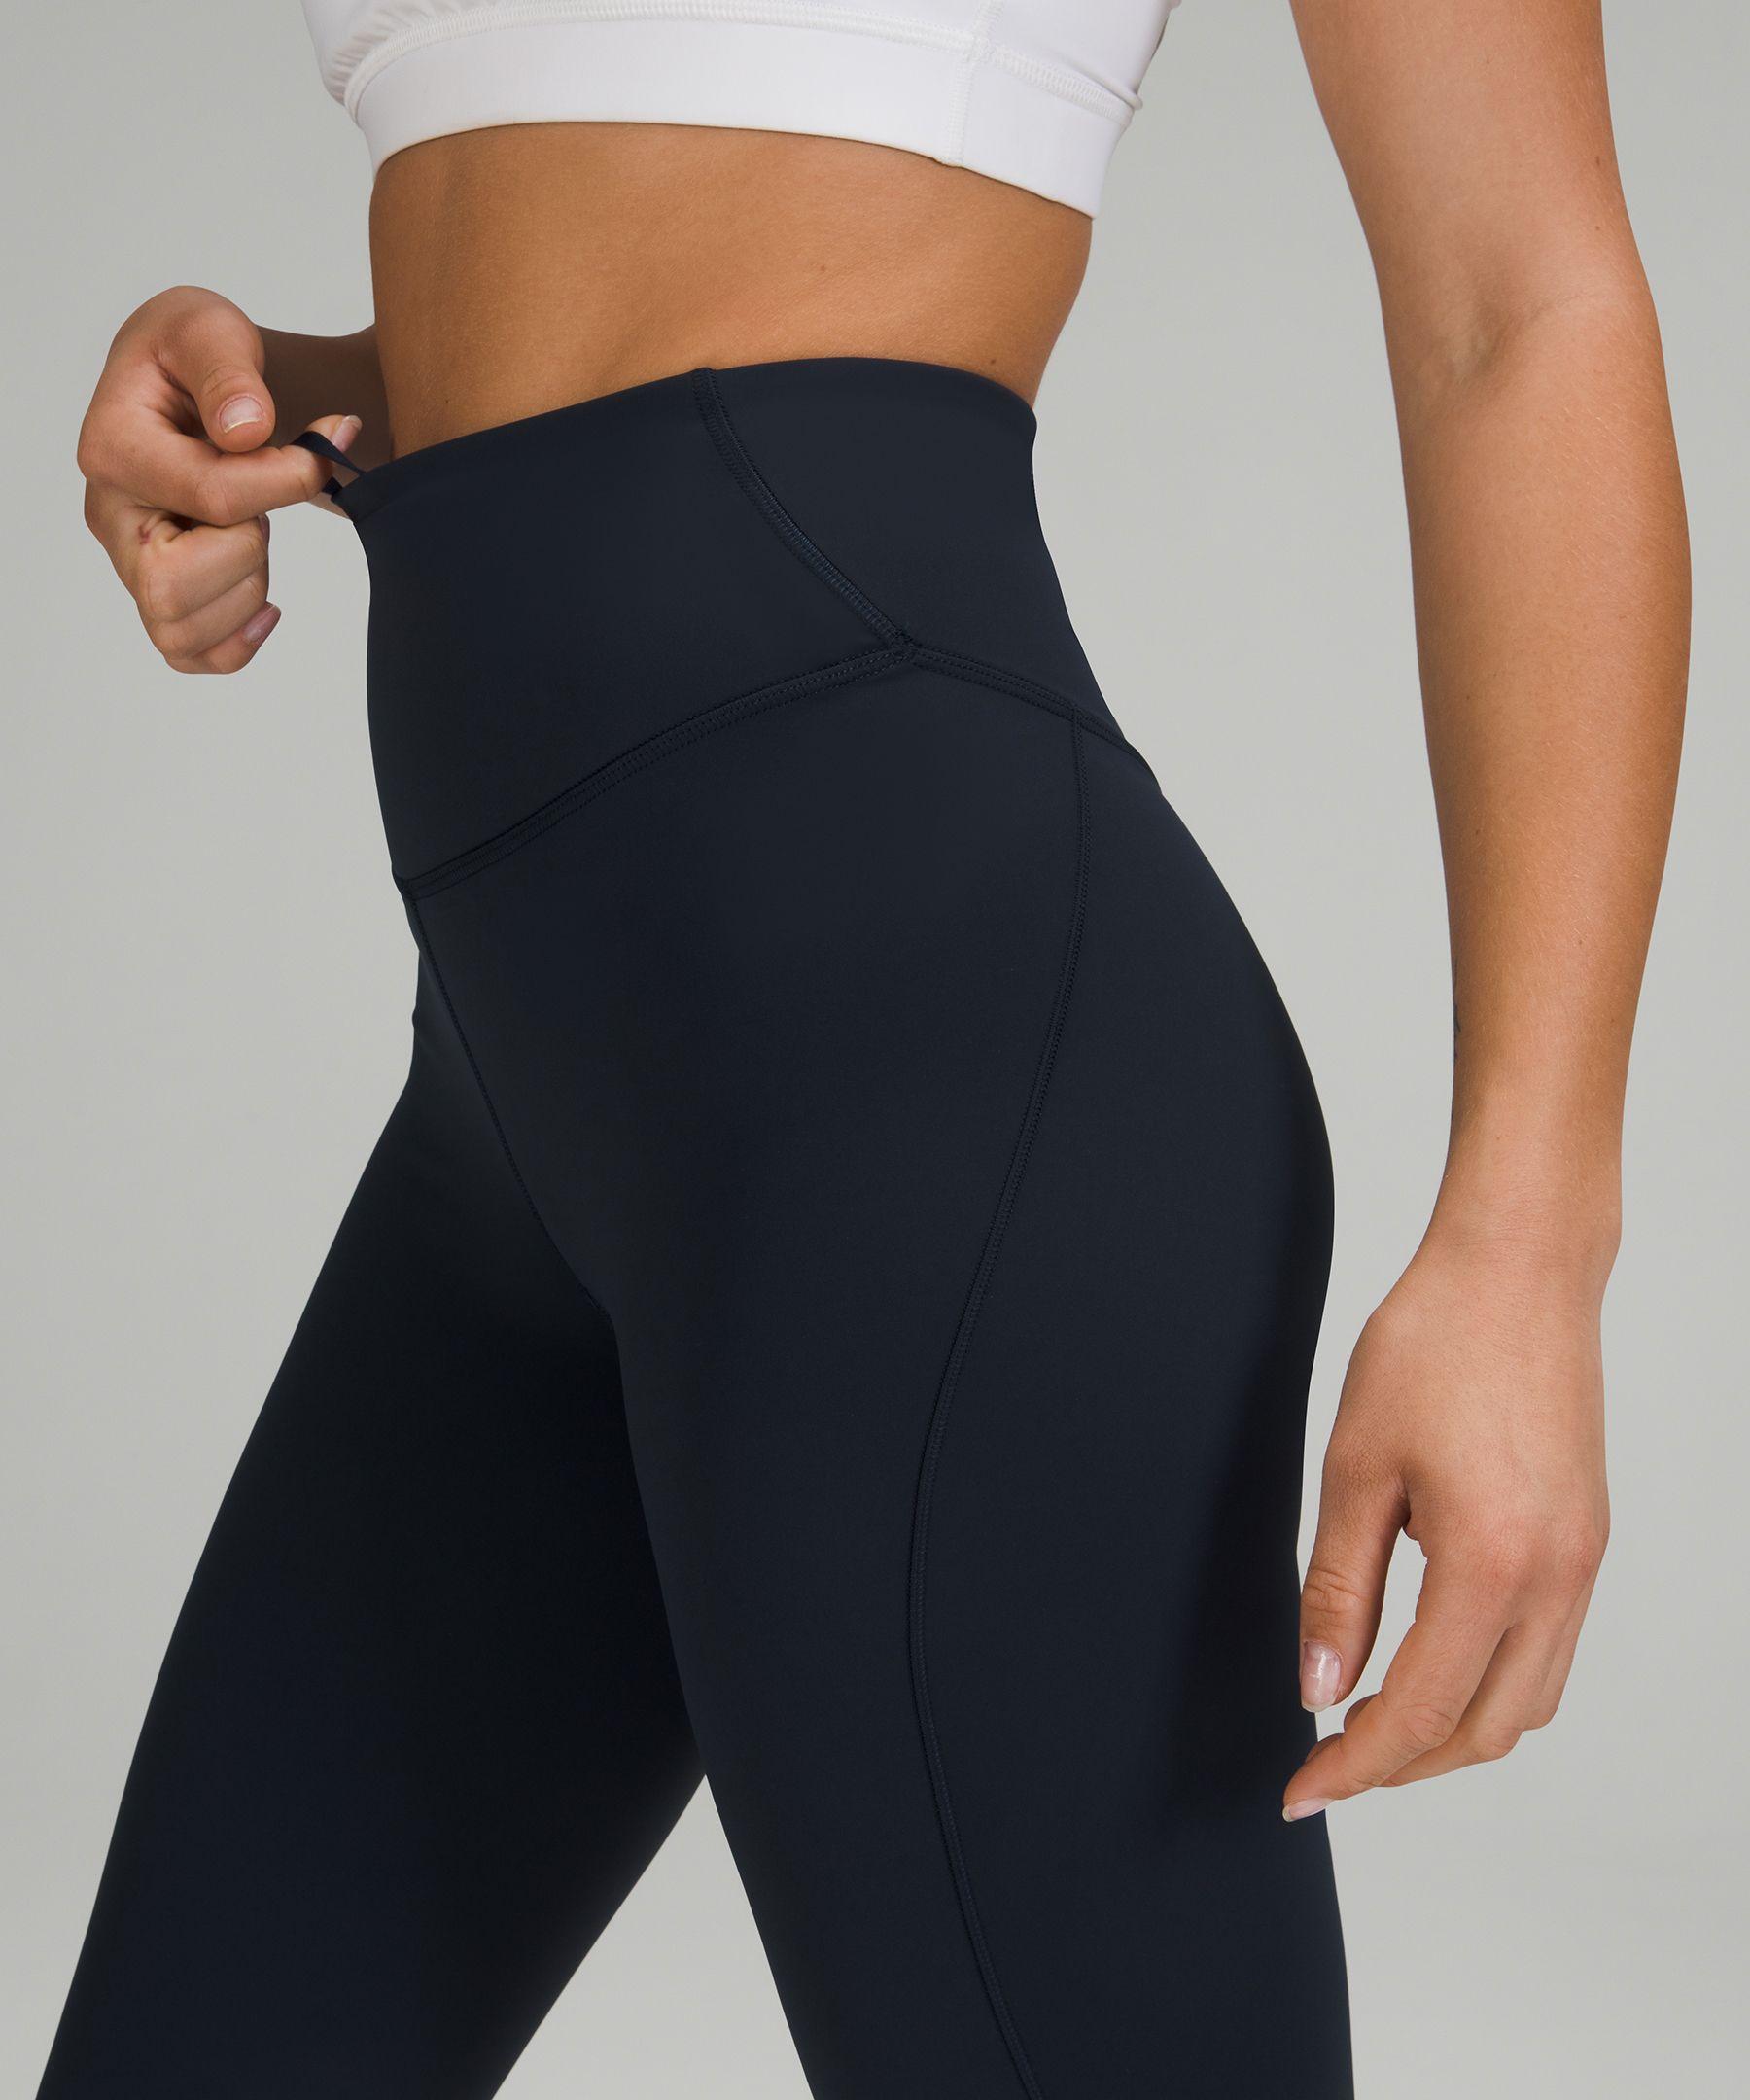 lululemon athletica Base Pace High-rise Running Tights 28 Brushed